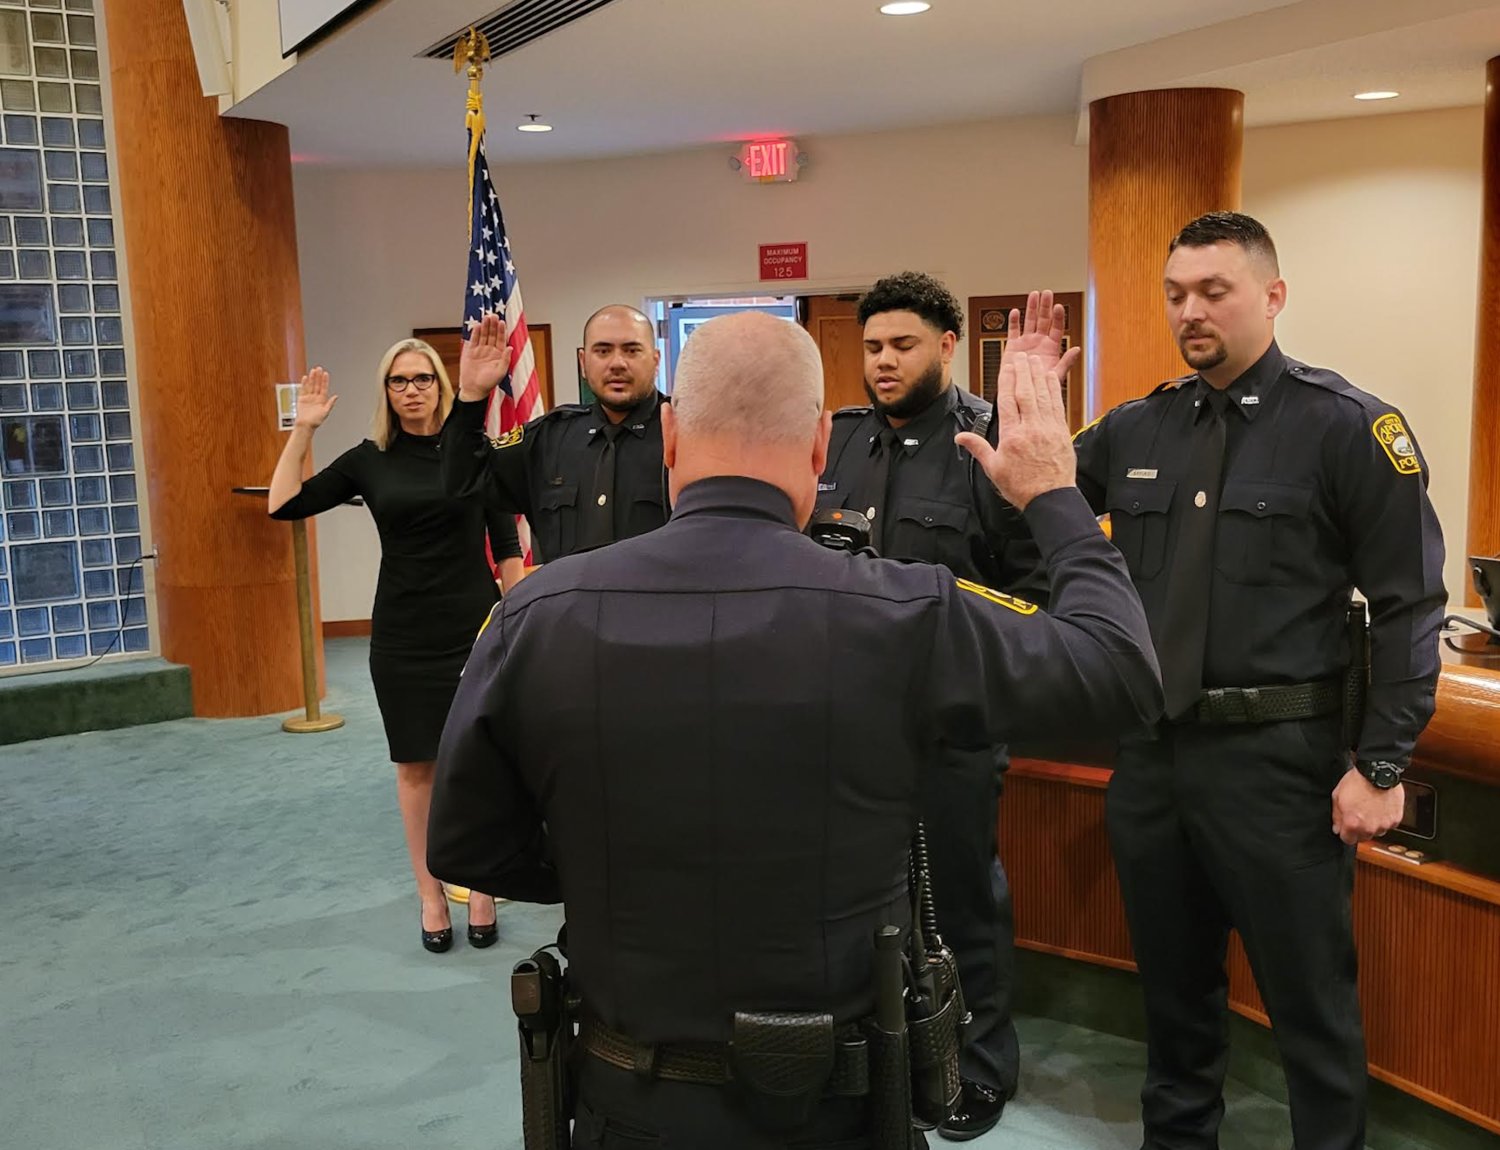 Apopka Police Chief Michael McKinley swears in new officers